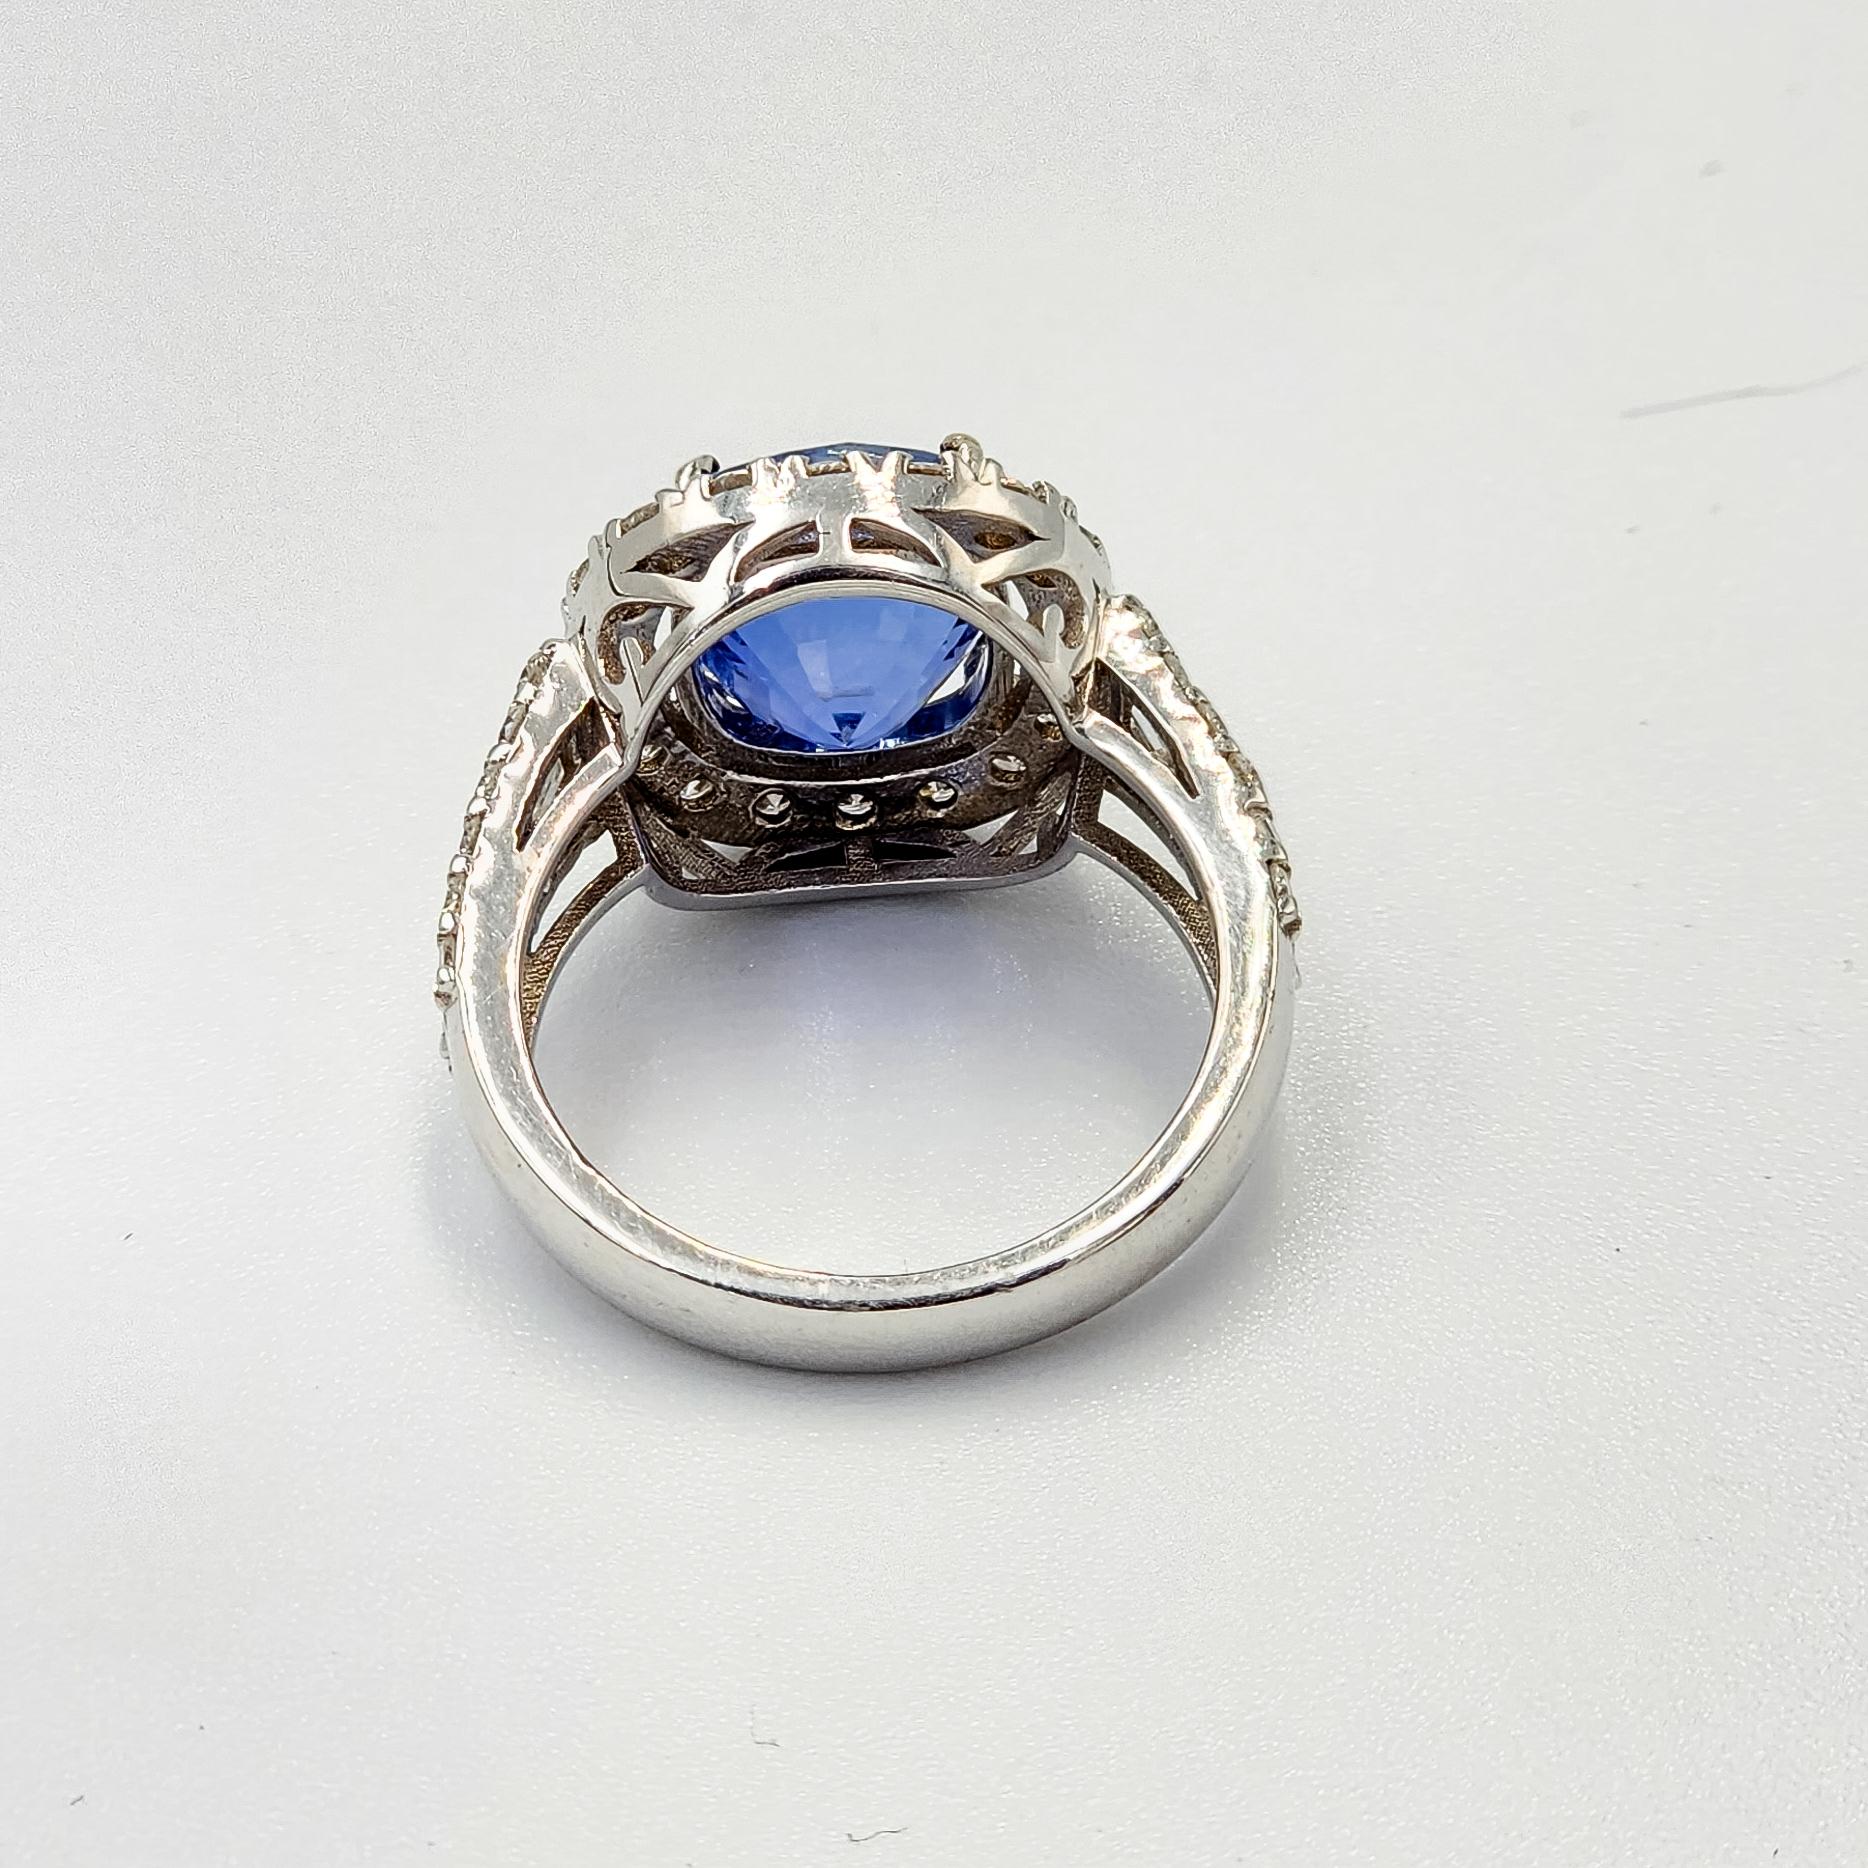 This is a beautiful GIA certified Blue Sapphire Ring with diamonds and 18k gold. It is a beautiful and amazing piece with vivid color, set in a custom designed ring to enhance its natural beauty!
Blue Sapphire : 5.16  carats
Certificate:   GIA